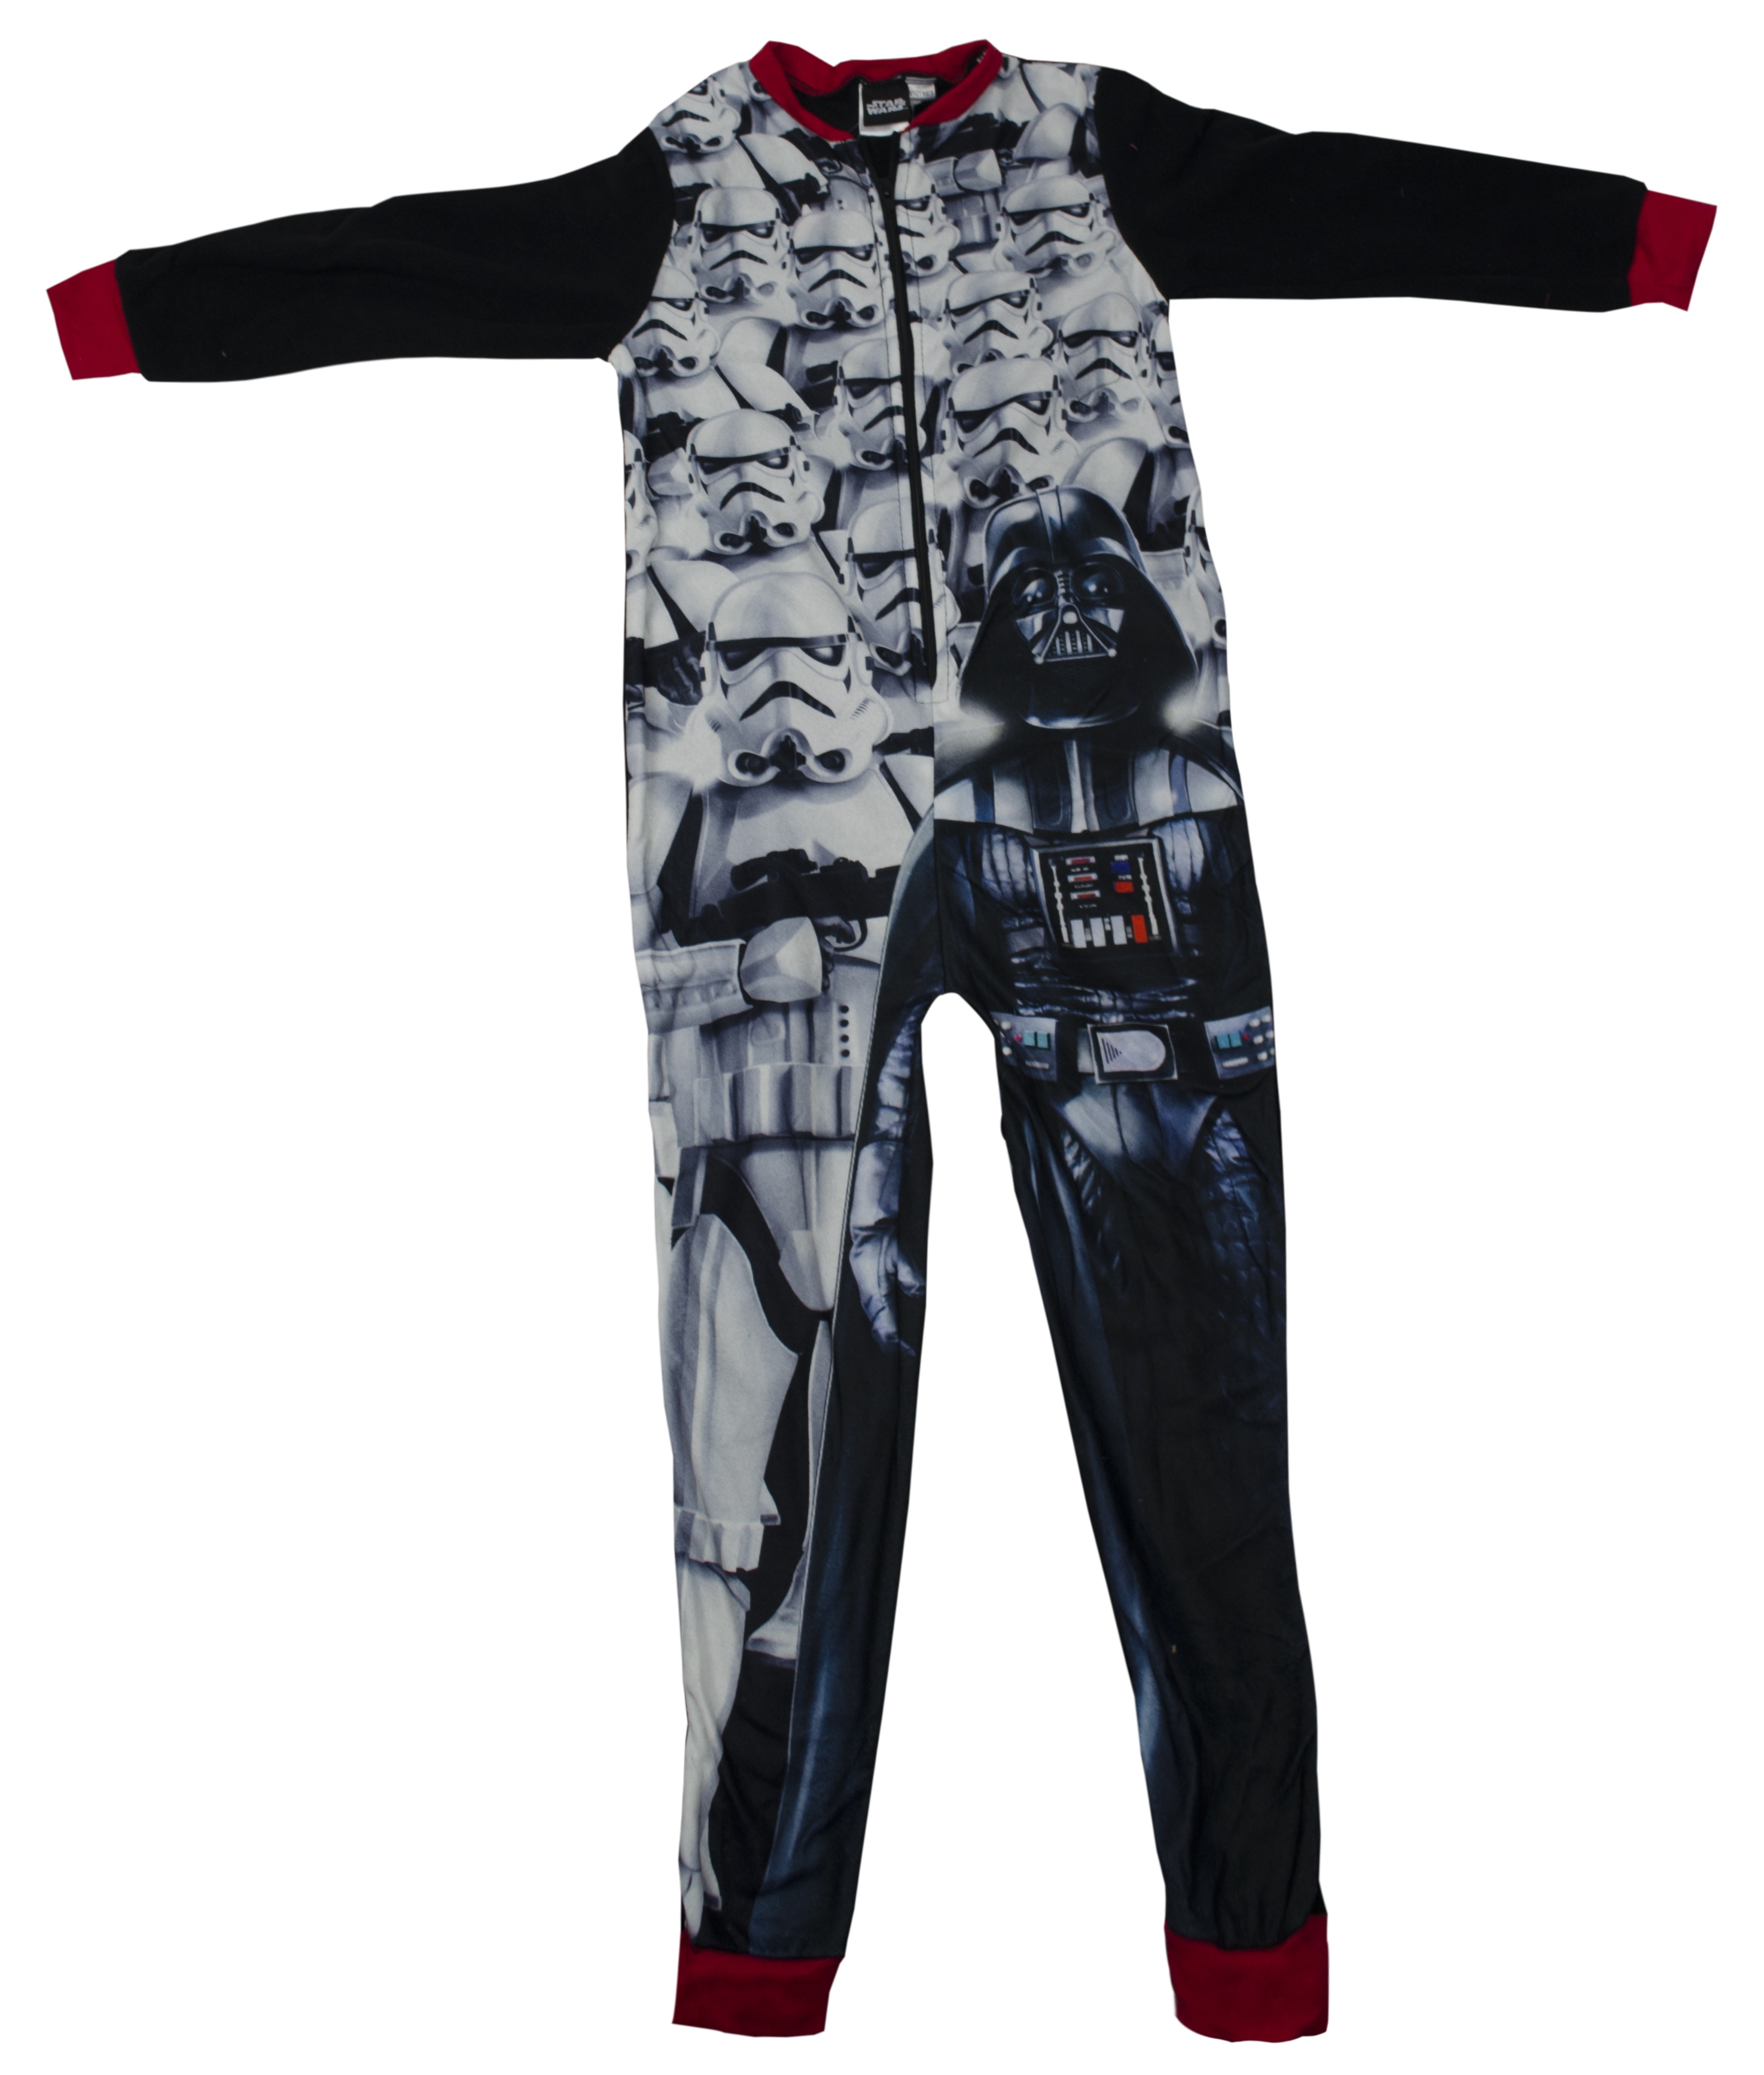 Star Wars 'Force' 4-10 Years Jumpsuit 1000000075090